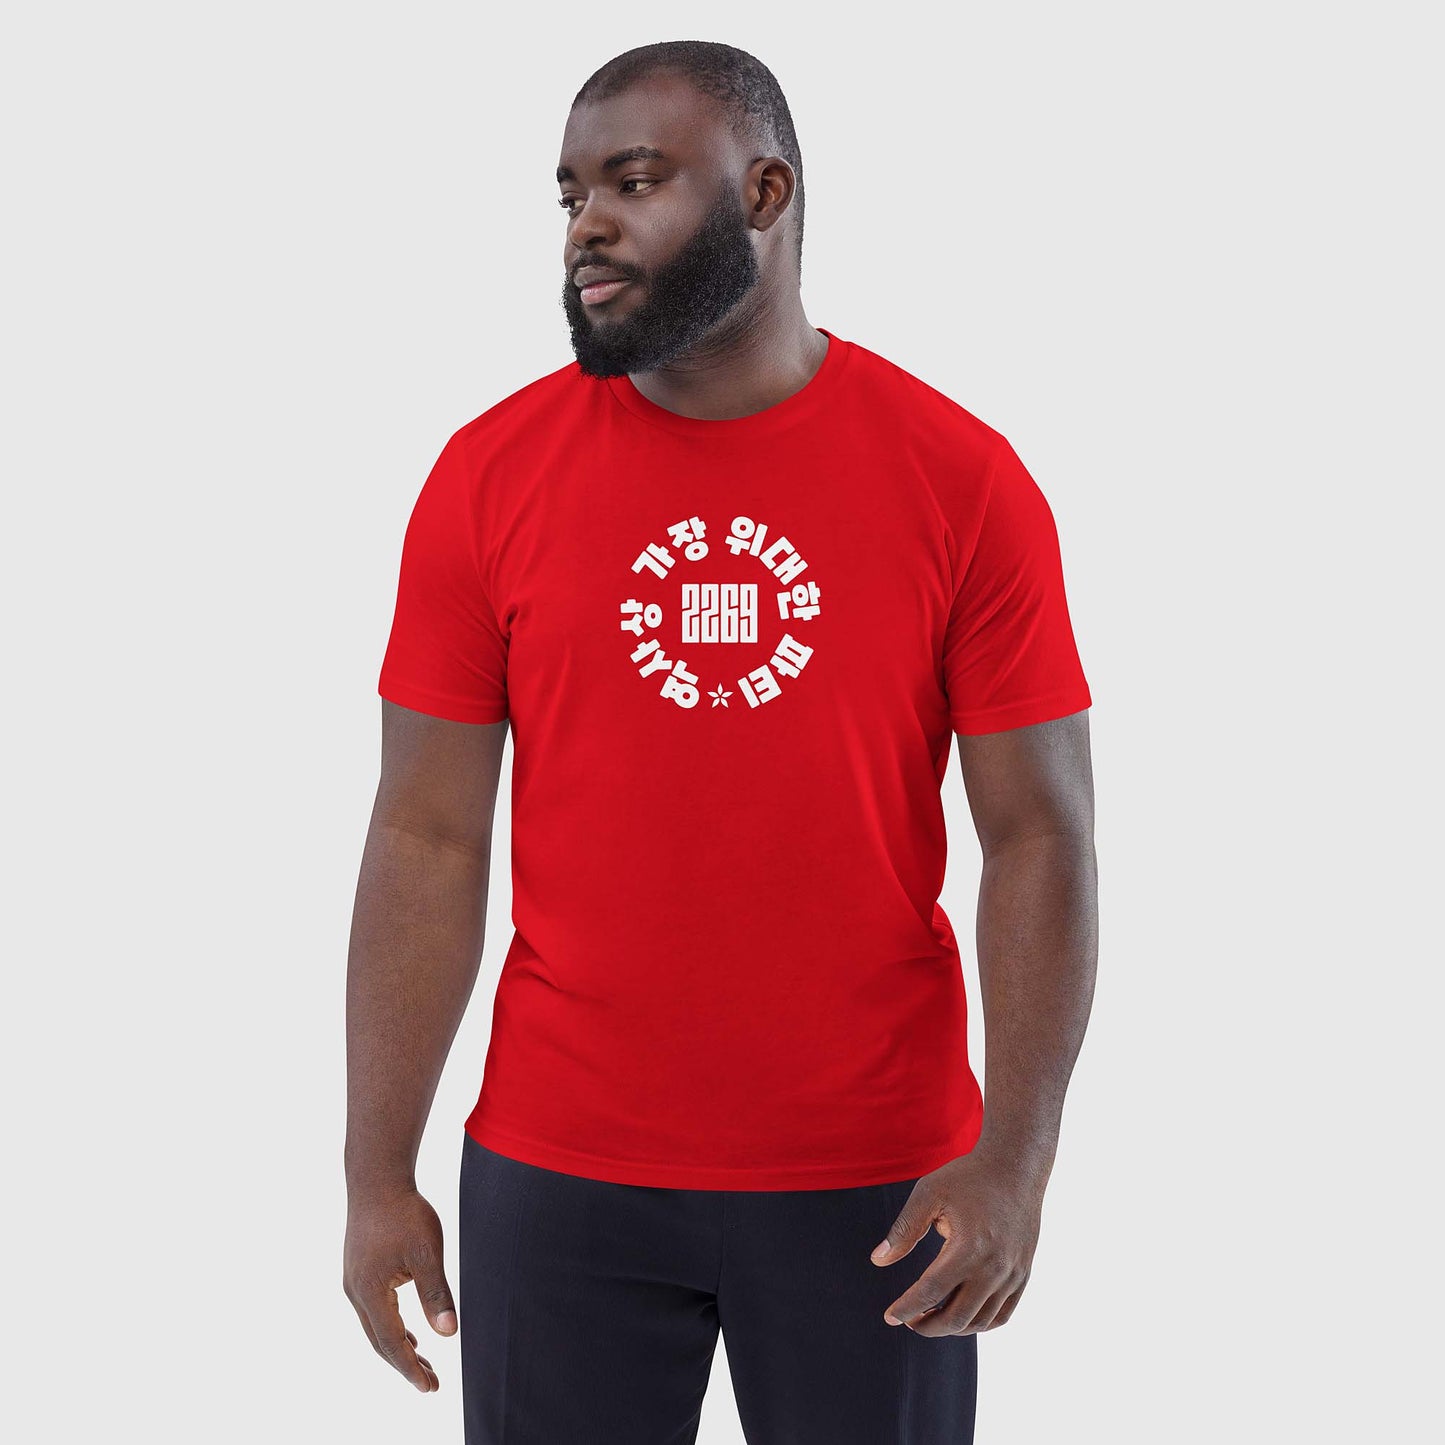 Men's red organic cotton t-shirt with Korean 2269 party circle